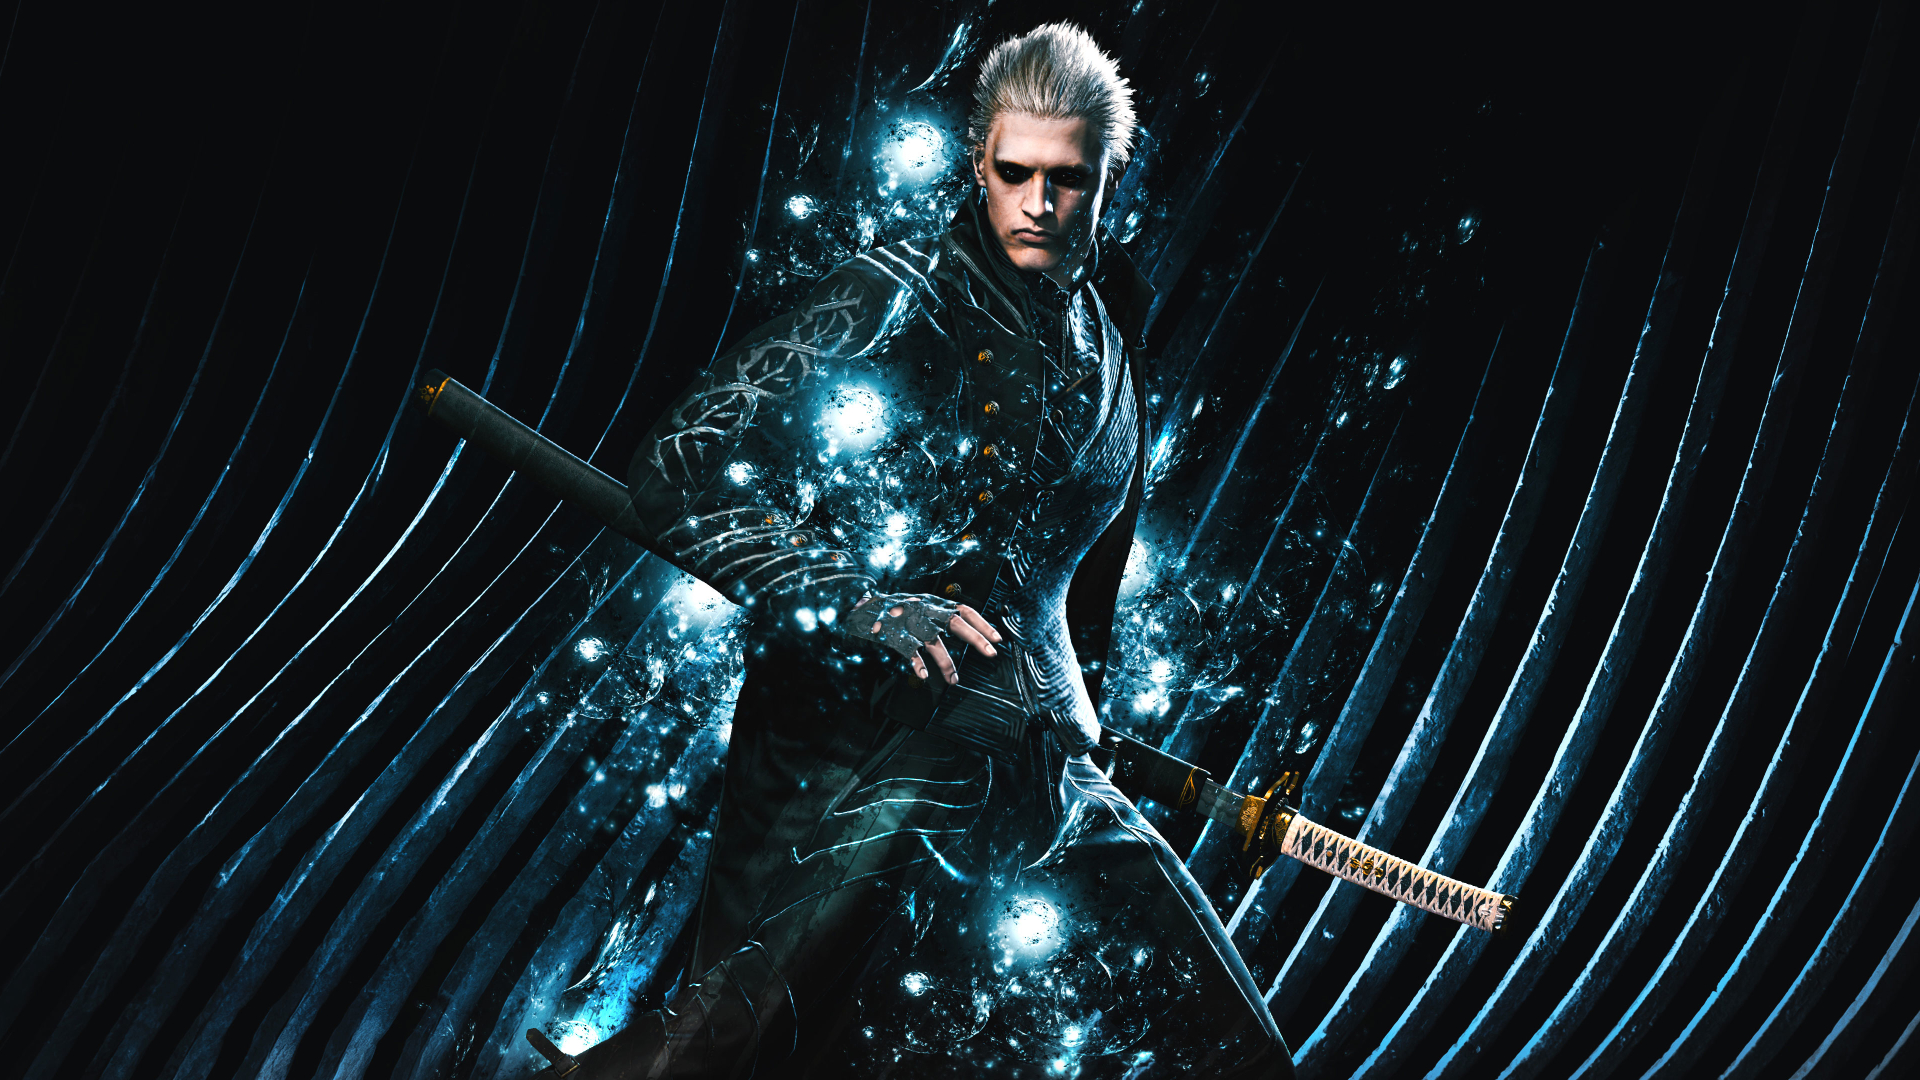 download vergil devil may cry